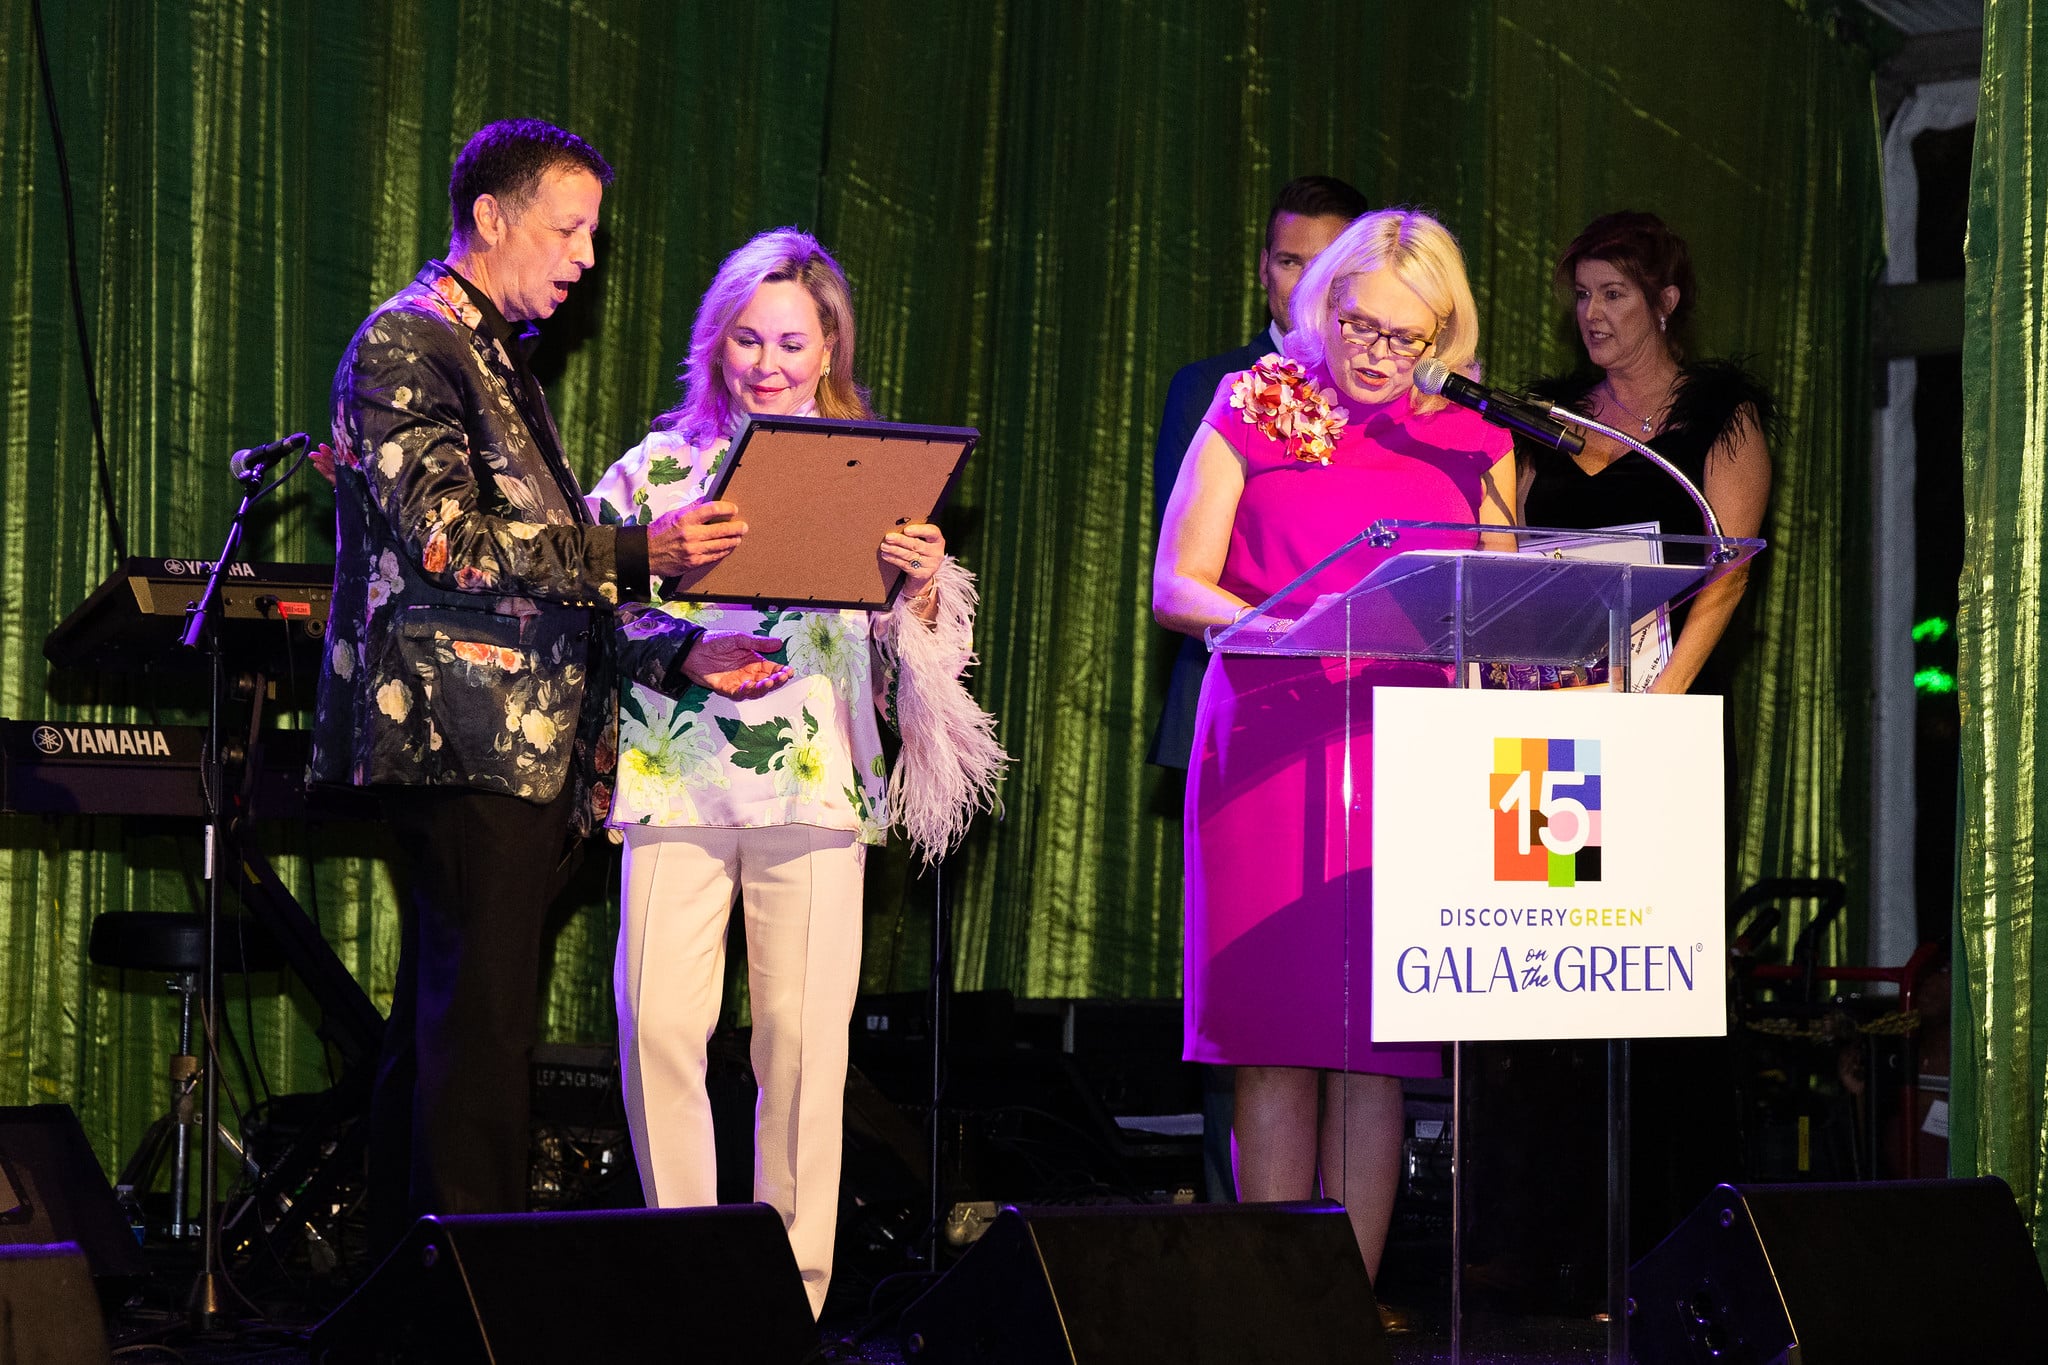 From L-R: Barry Mandel, Nancy Kinder, Julie Sudduth Gala on the Green® at Discovery Green in downtown Houston. February 23, 2023. Photo: Lawrence Elizabeth Knox